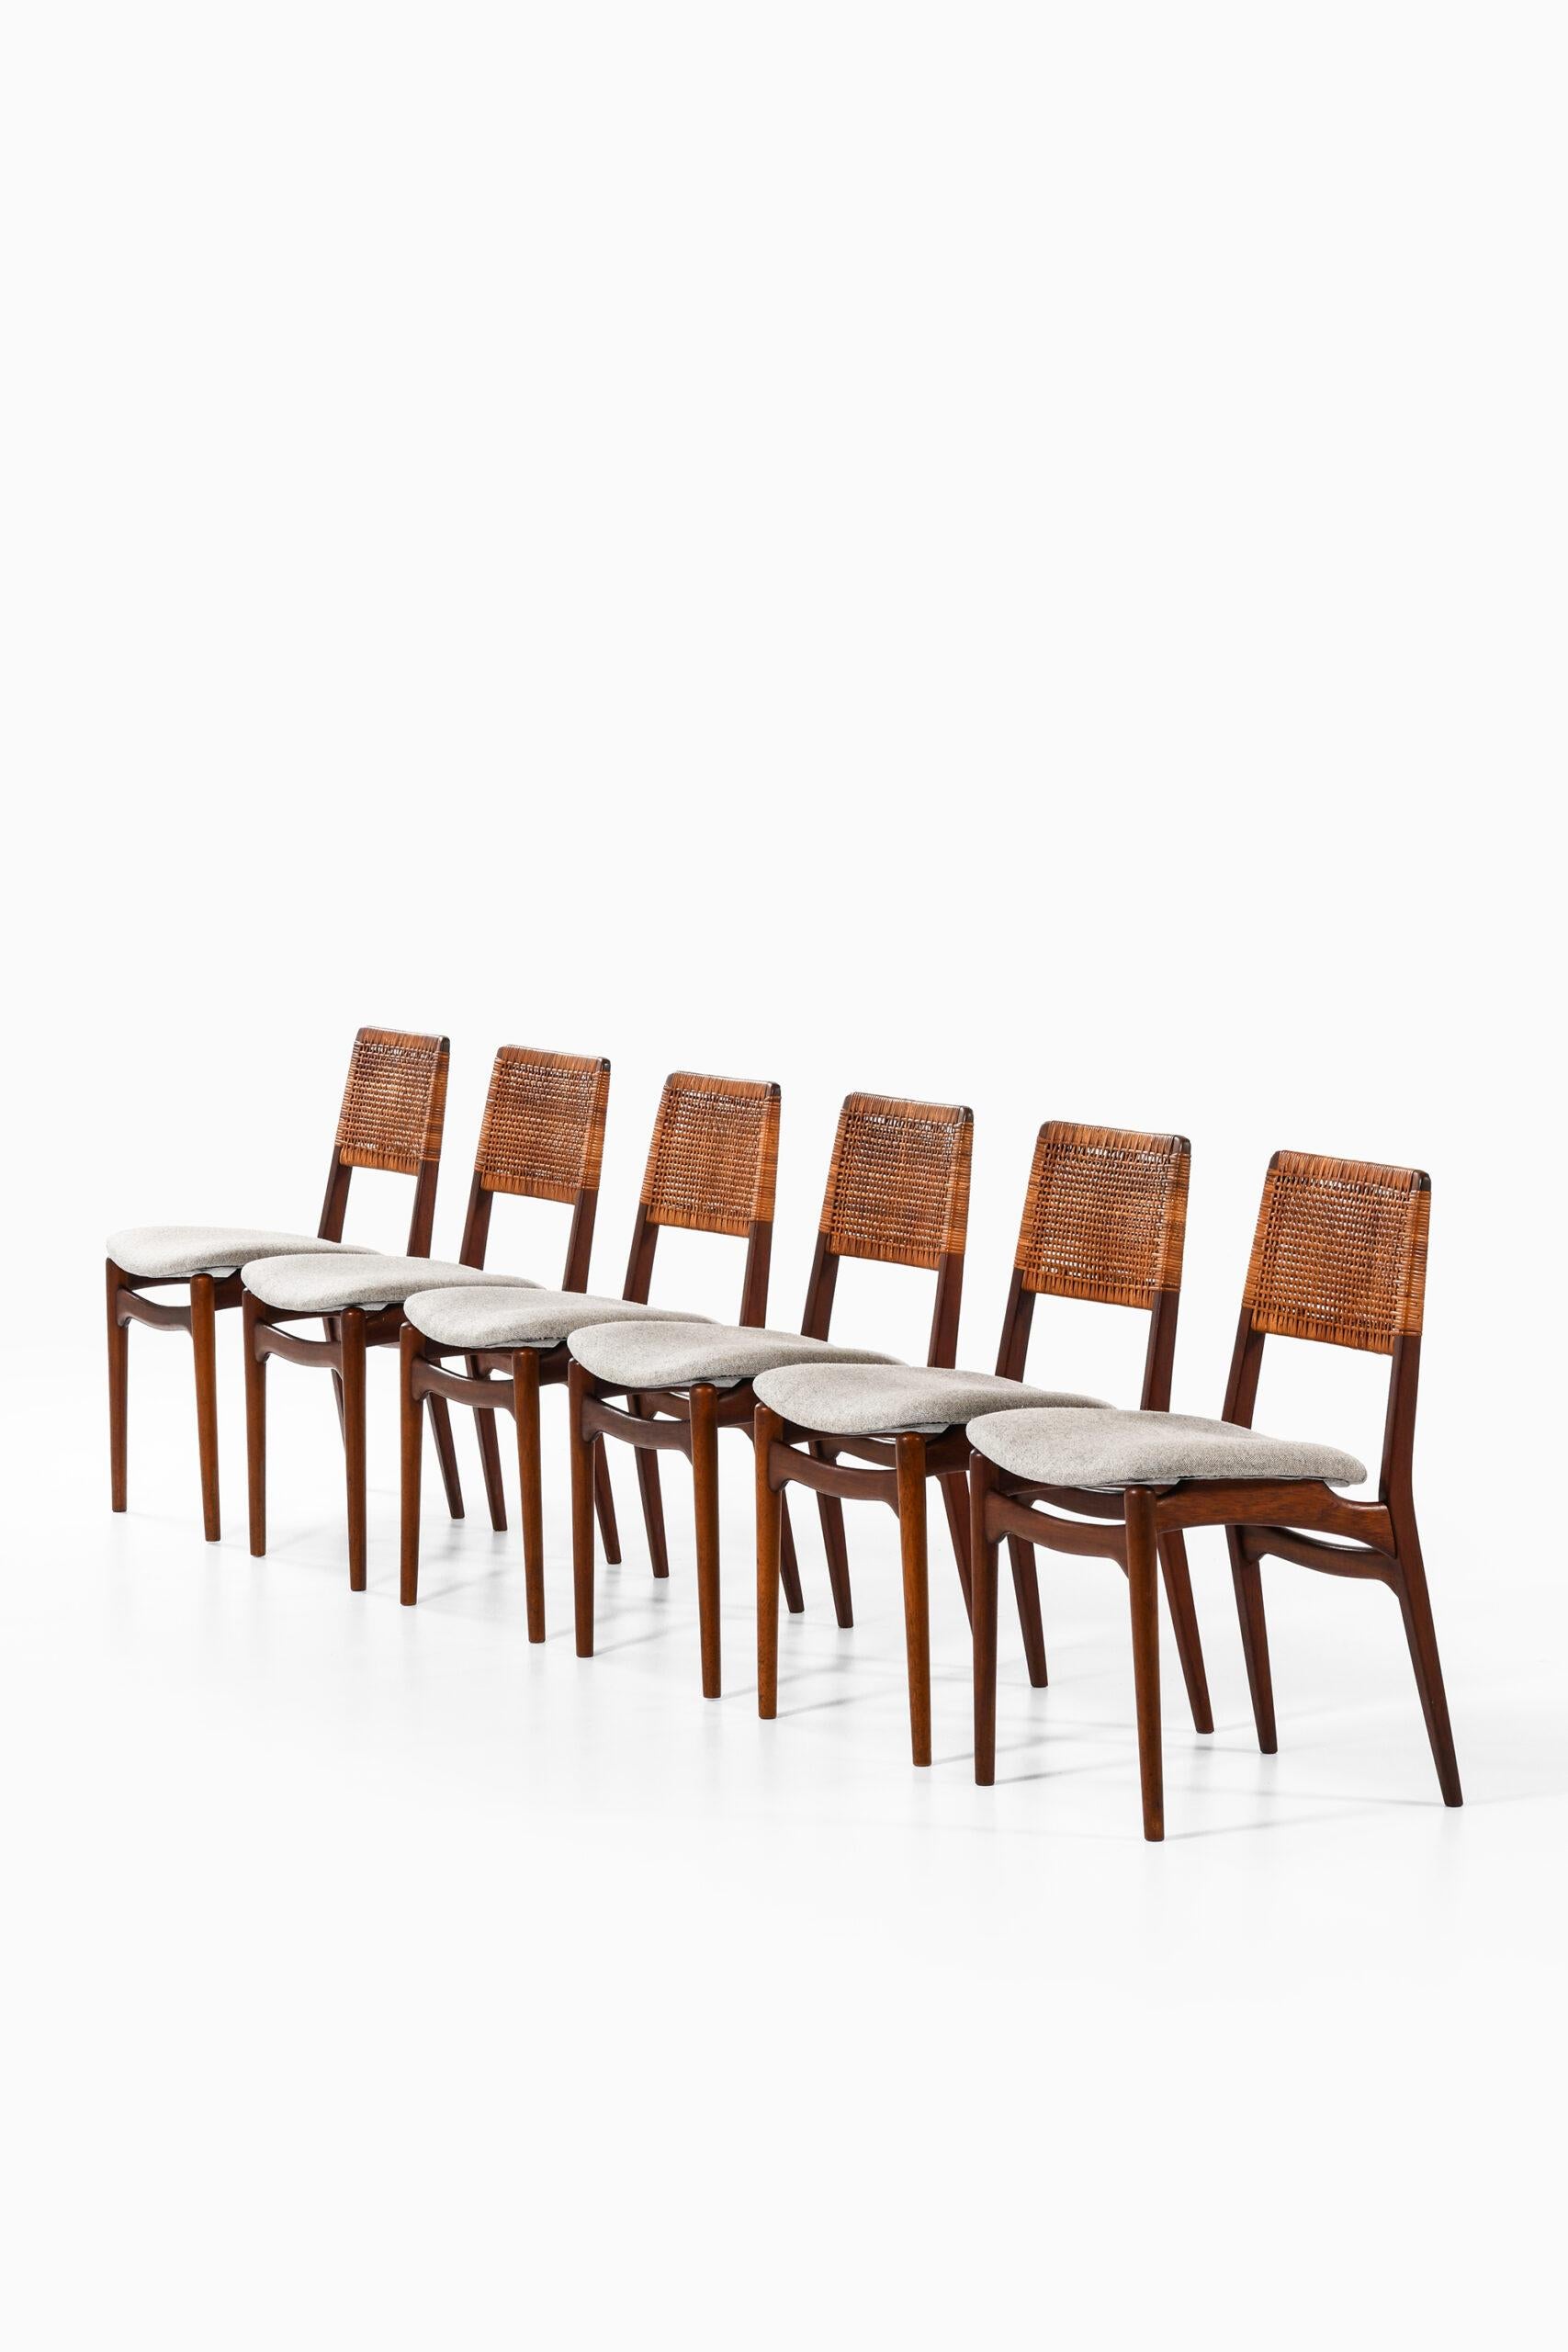 Rare set of 12 dining chairs model 47 designed by E. Knudsen. Produced by Jensen & Lykkegaard in Denmark.